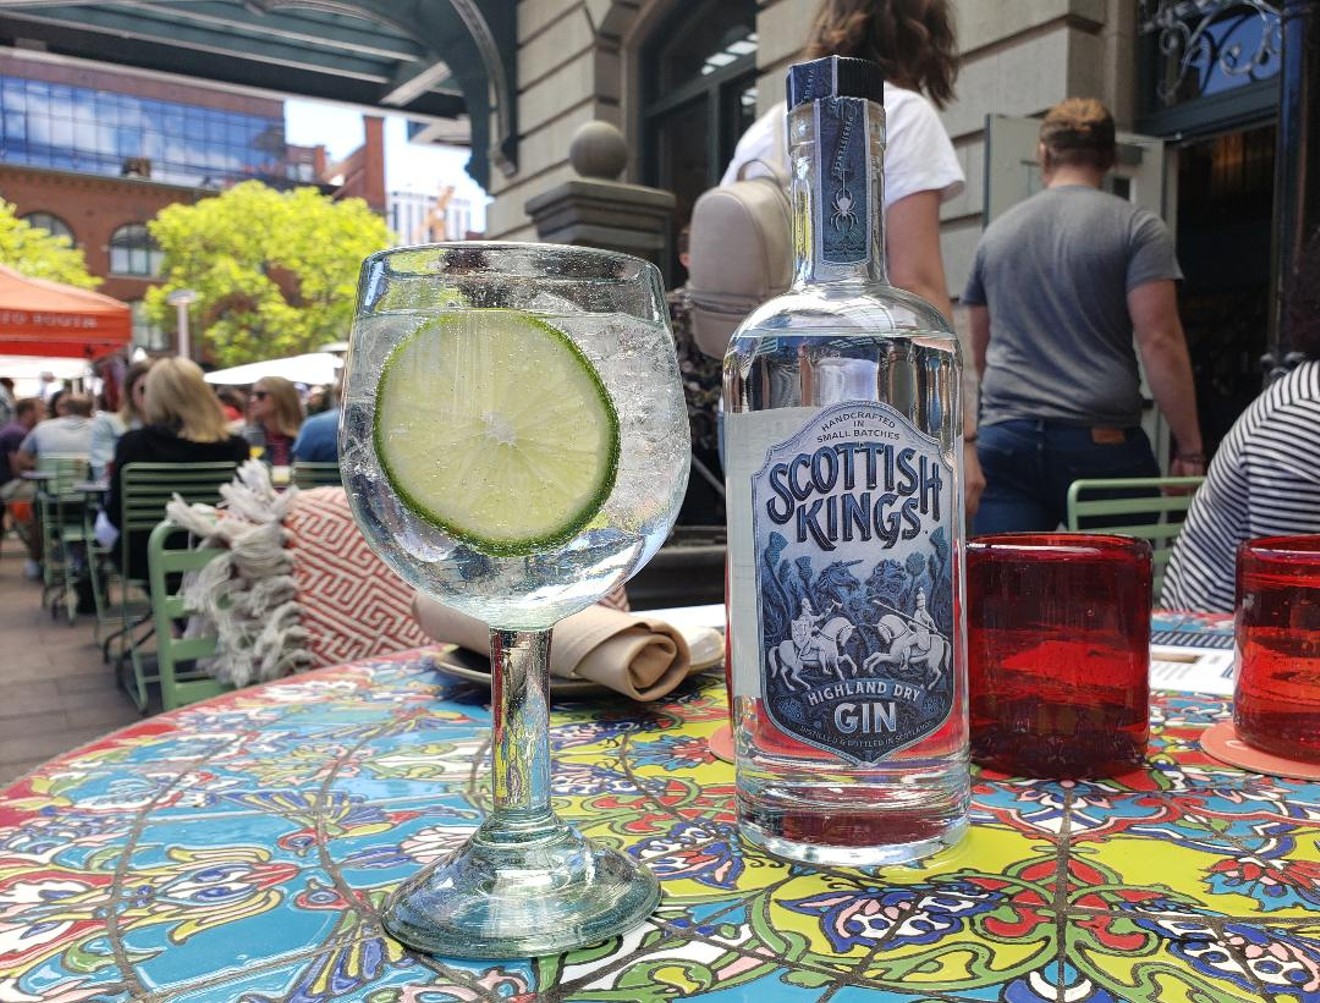 Gin and tonic and a bottle of Scottish Kings Gin at Ultreia in Denver.